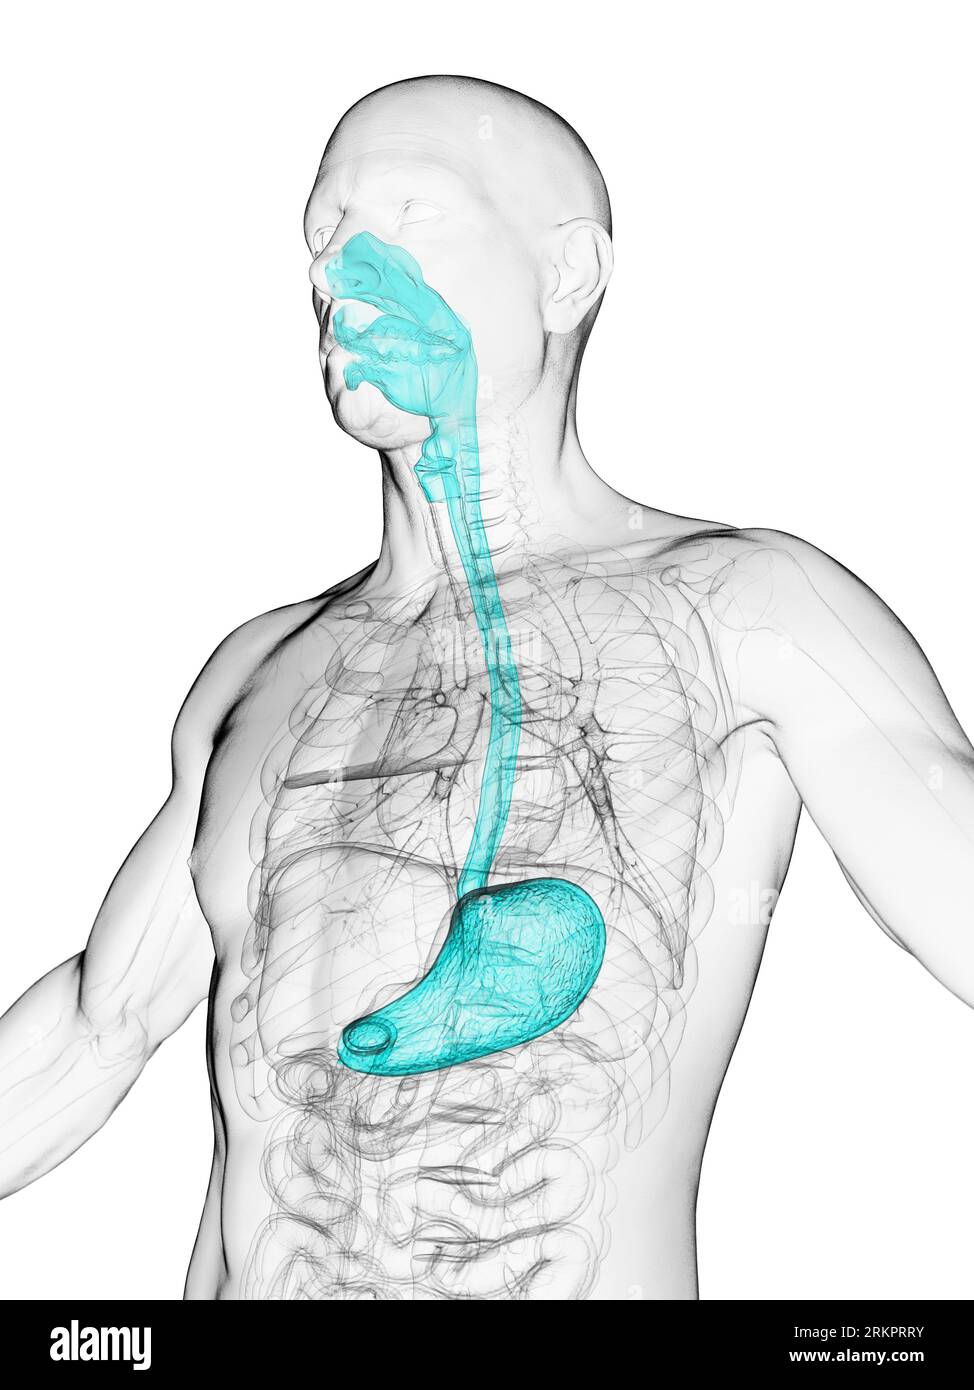 Oesophagus and stomach, illustration. Stock Photo